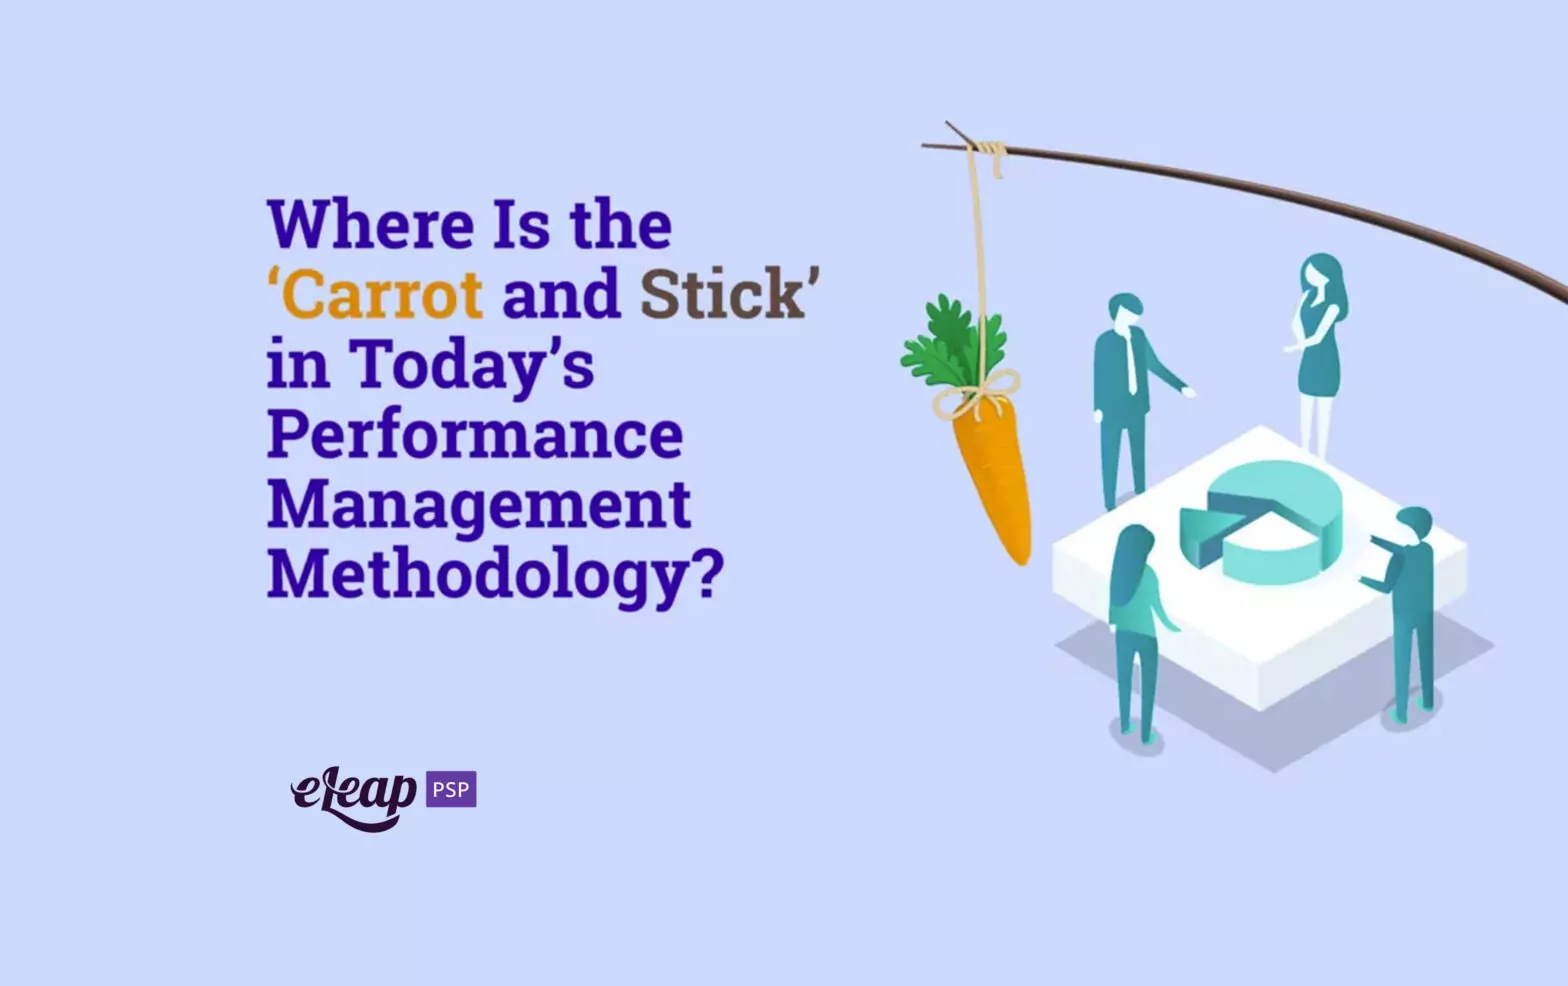 Where Is the ‘Carrot and Stick’ in Today’s Performance Management Methodology?